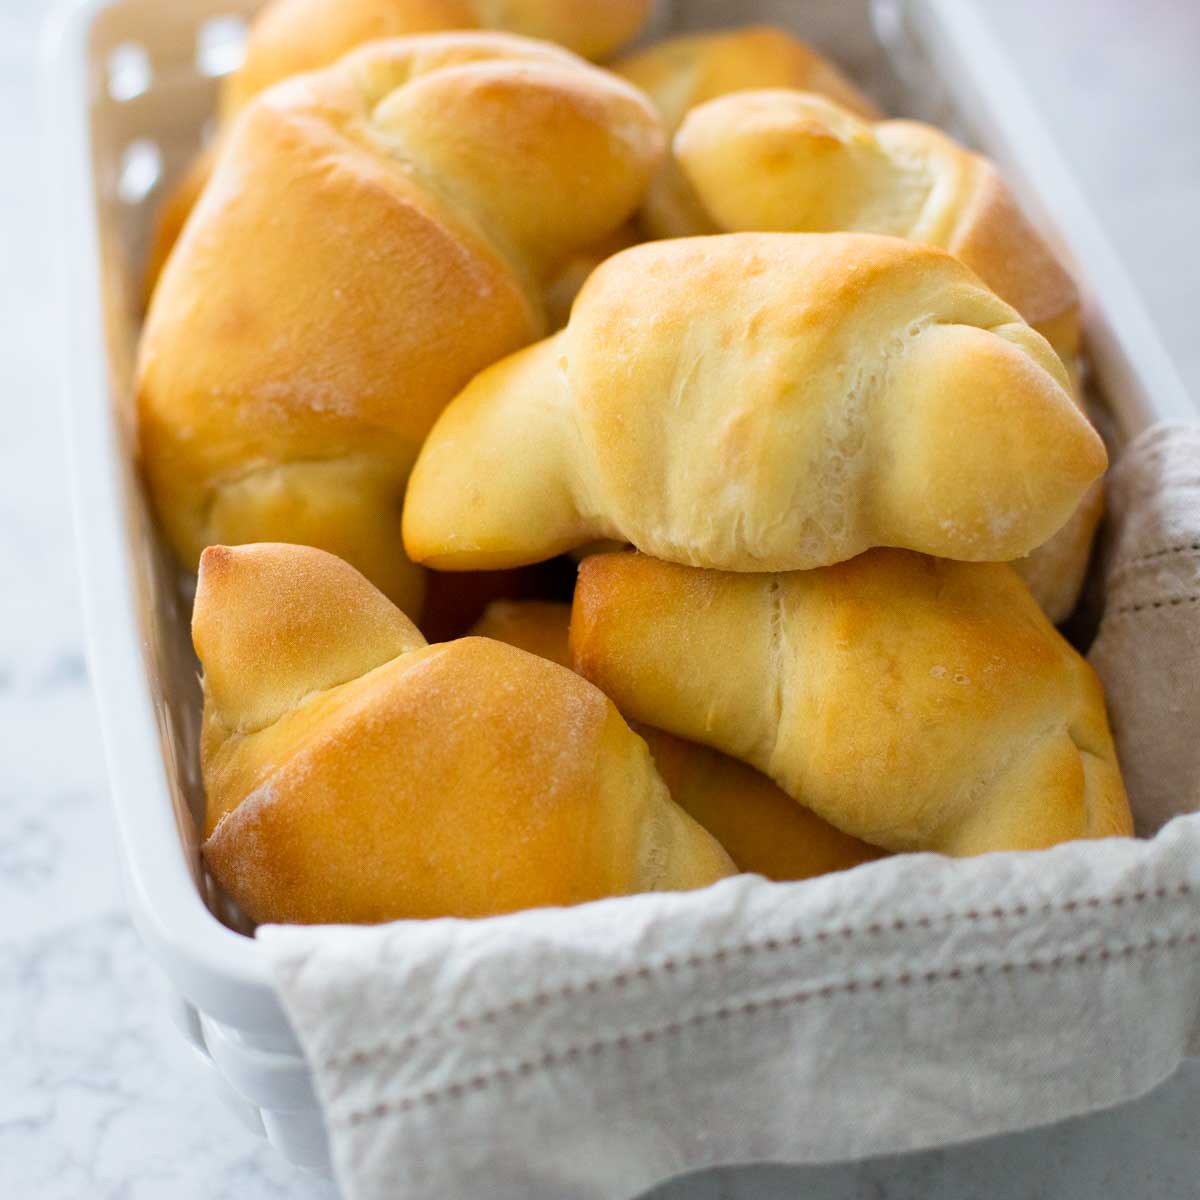 A bread basket filled with golden brown horn-shaped dinner rolls made in a bread machine.